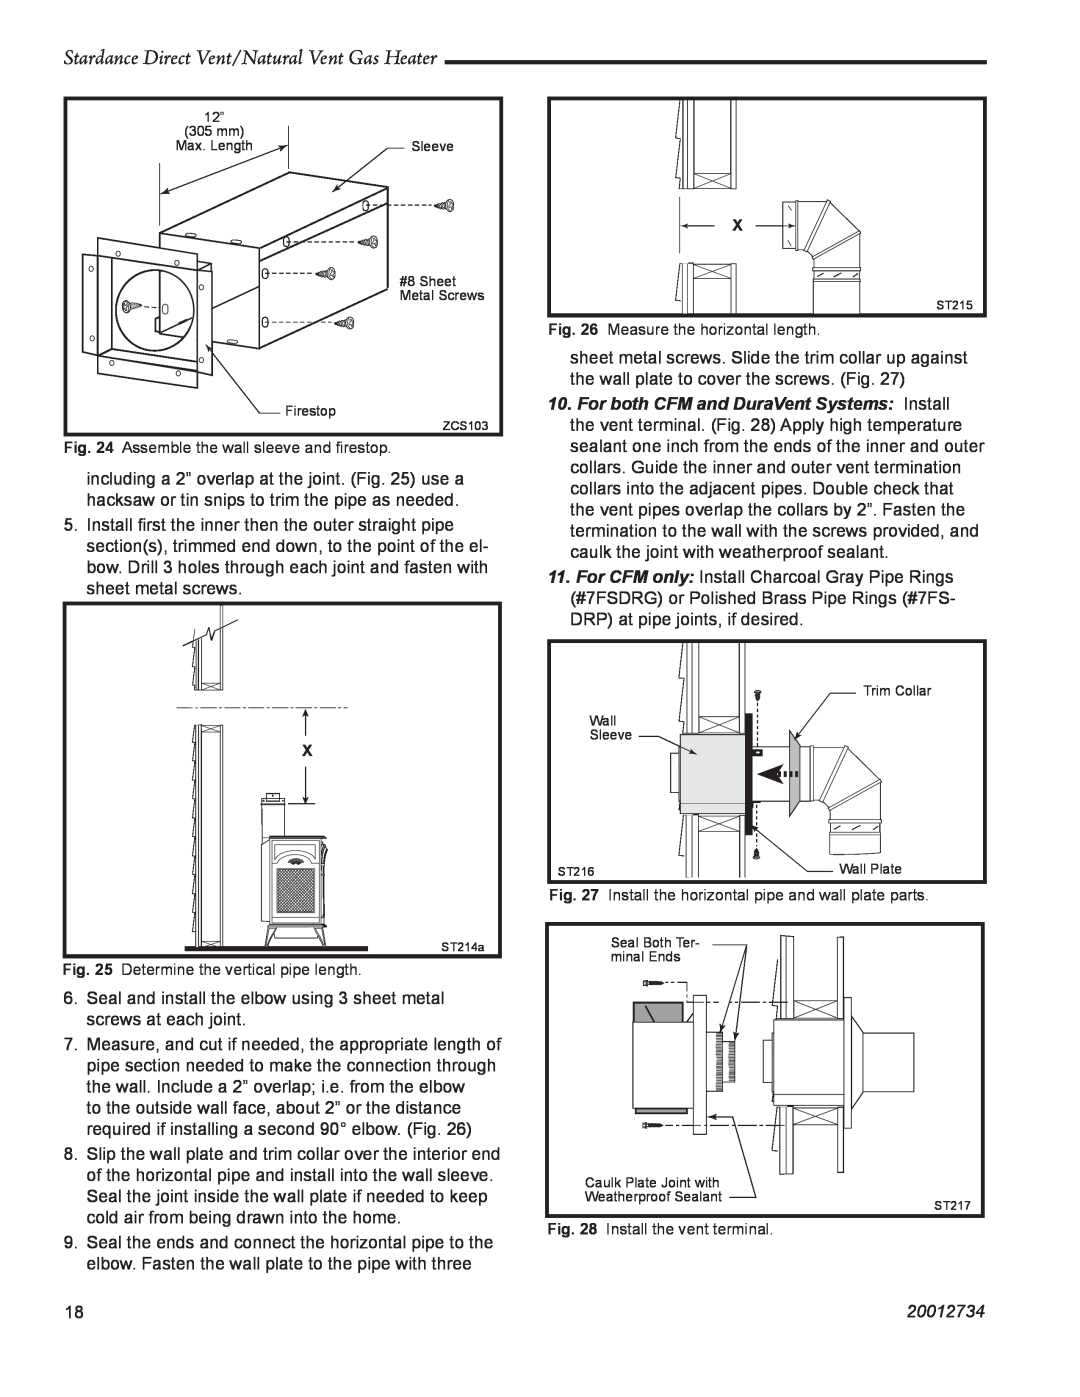 Vermont Casting SDDVTCVG, SDDVTCMB manual Stardance Direct Vent/Natural Vent Gas Heater, 20012734 